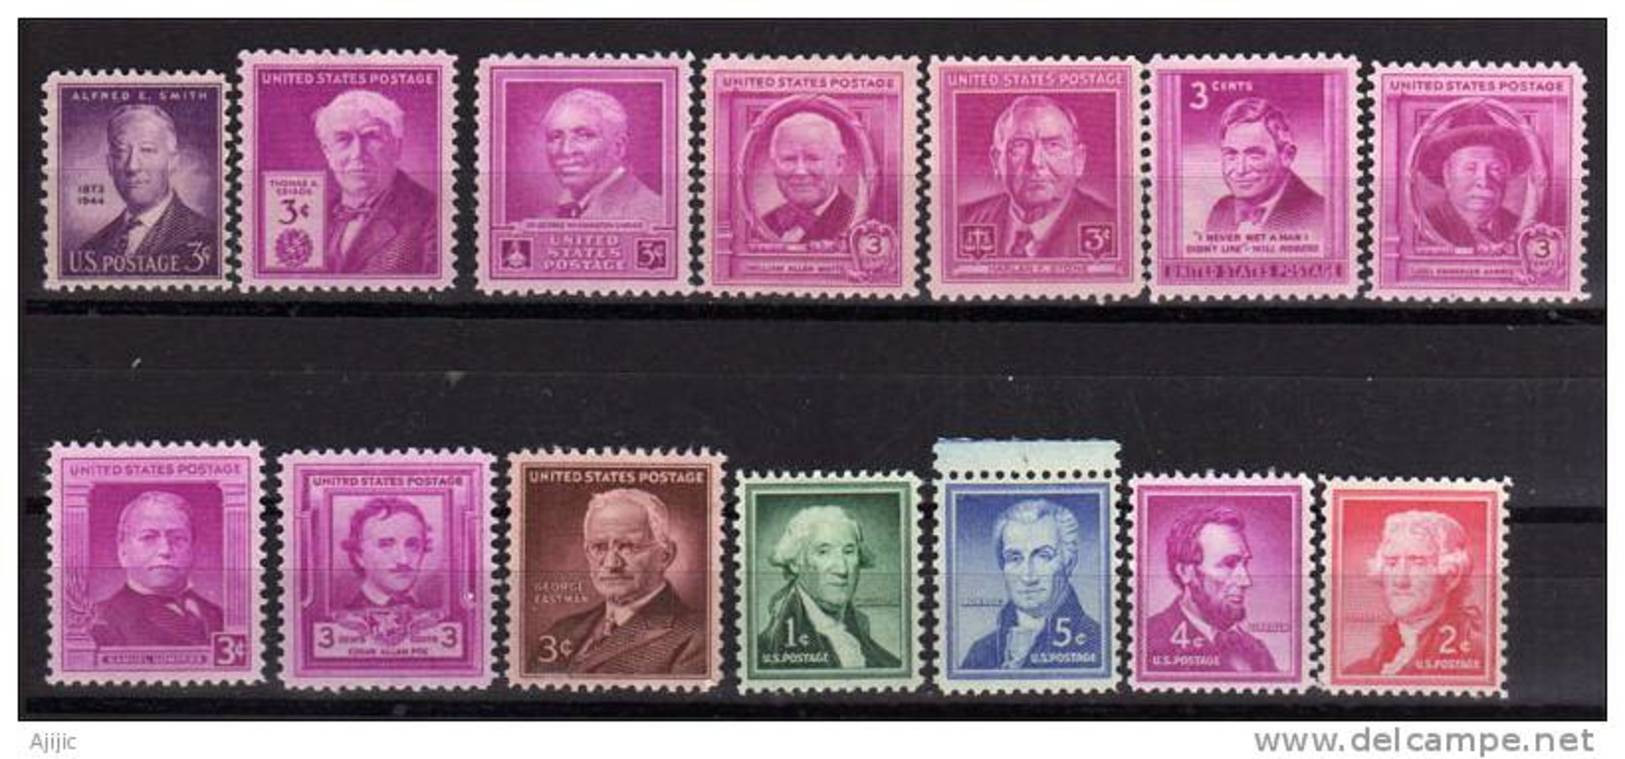 Personnalites Americaines (Edgar A.Poe,Jefferson,Lincoln,James Monroe,Will Rogers,etc) 14 T-p Neufs ** - Nuovi